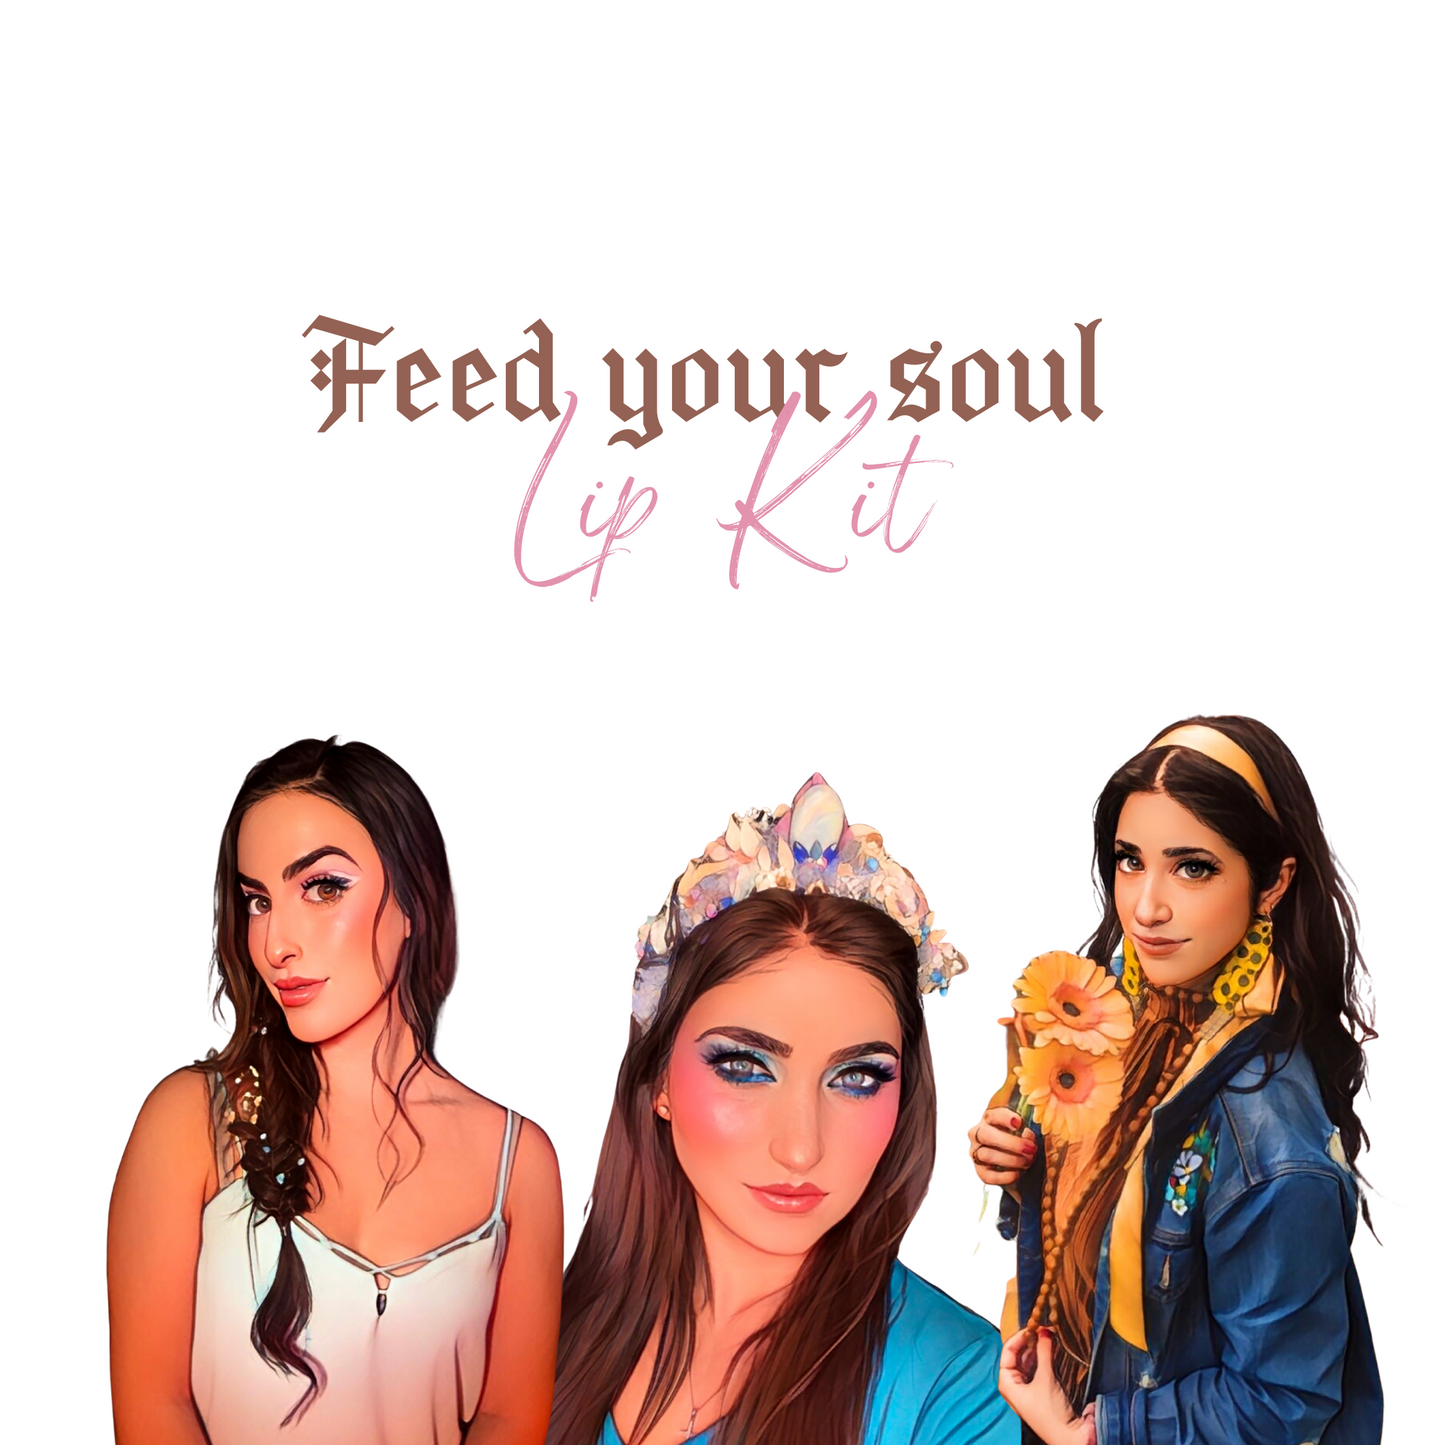 Feed your soul - Lip Kit